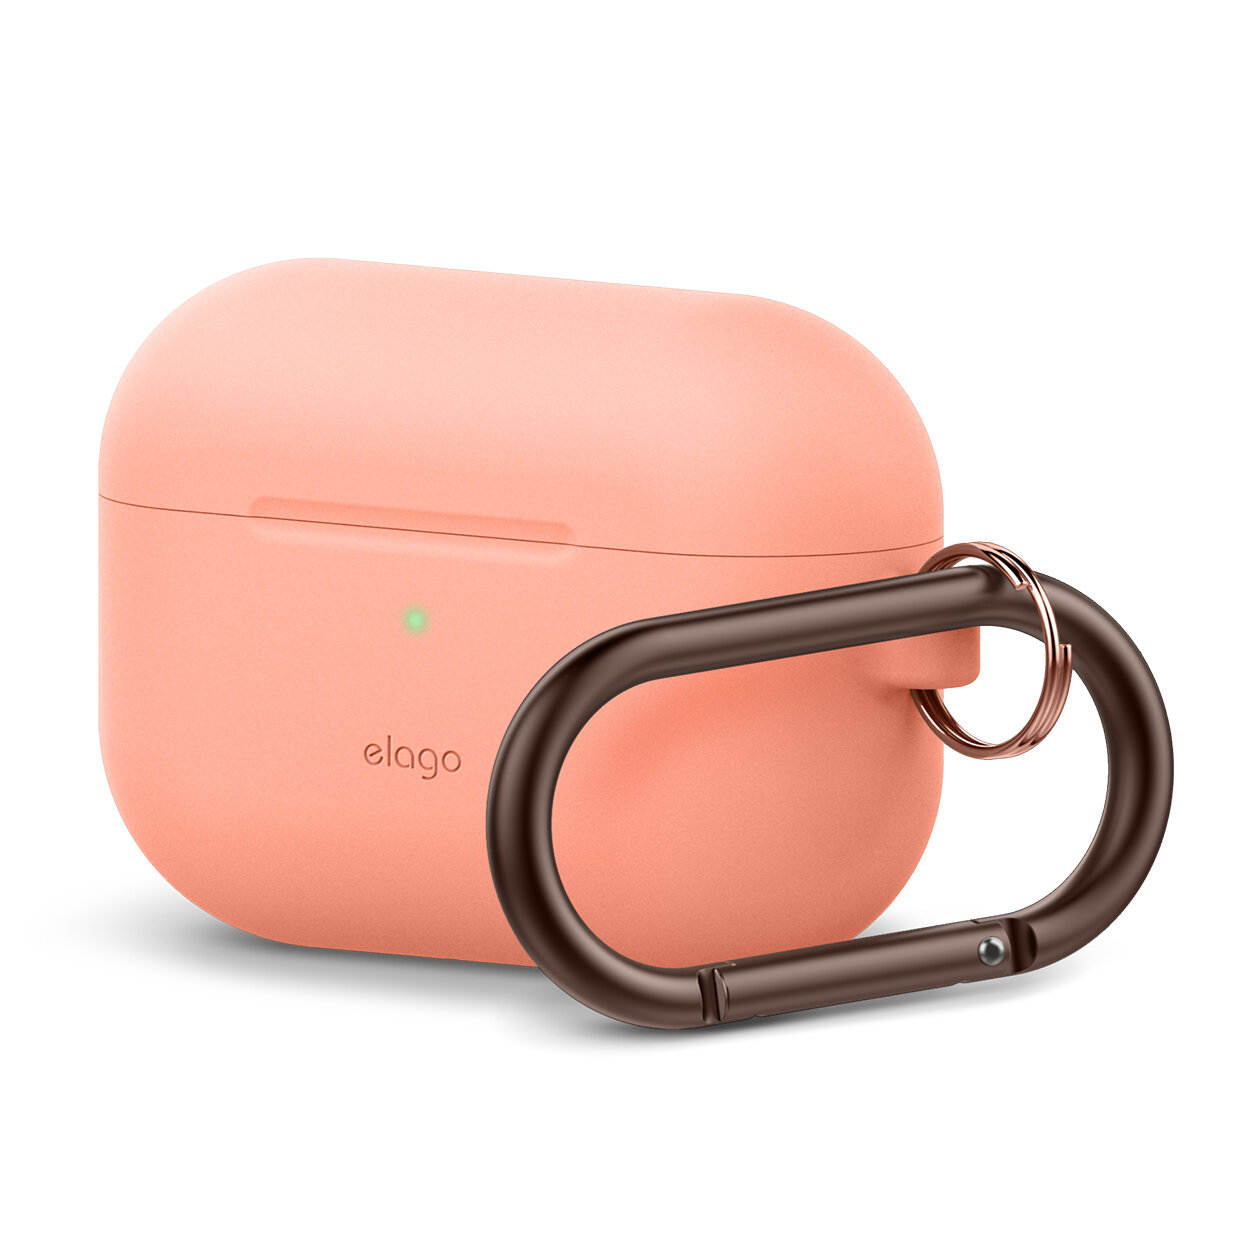 elago Peach AirPods Pro Case Cover Compatible with Apple AirPods Pro Case 3D Cute Design Case Cover with Keychain US Patent Registered Peach